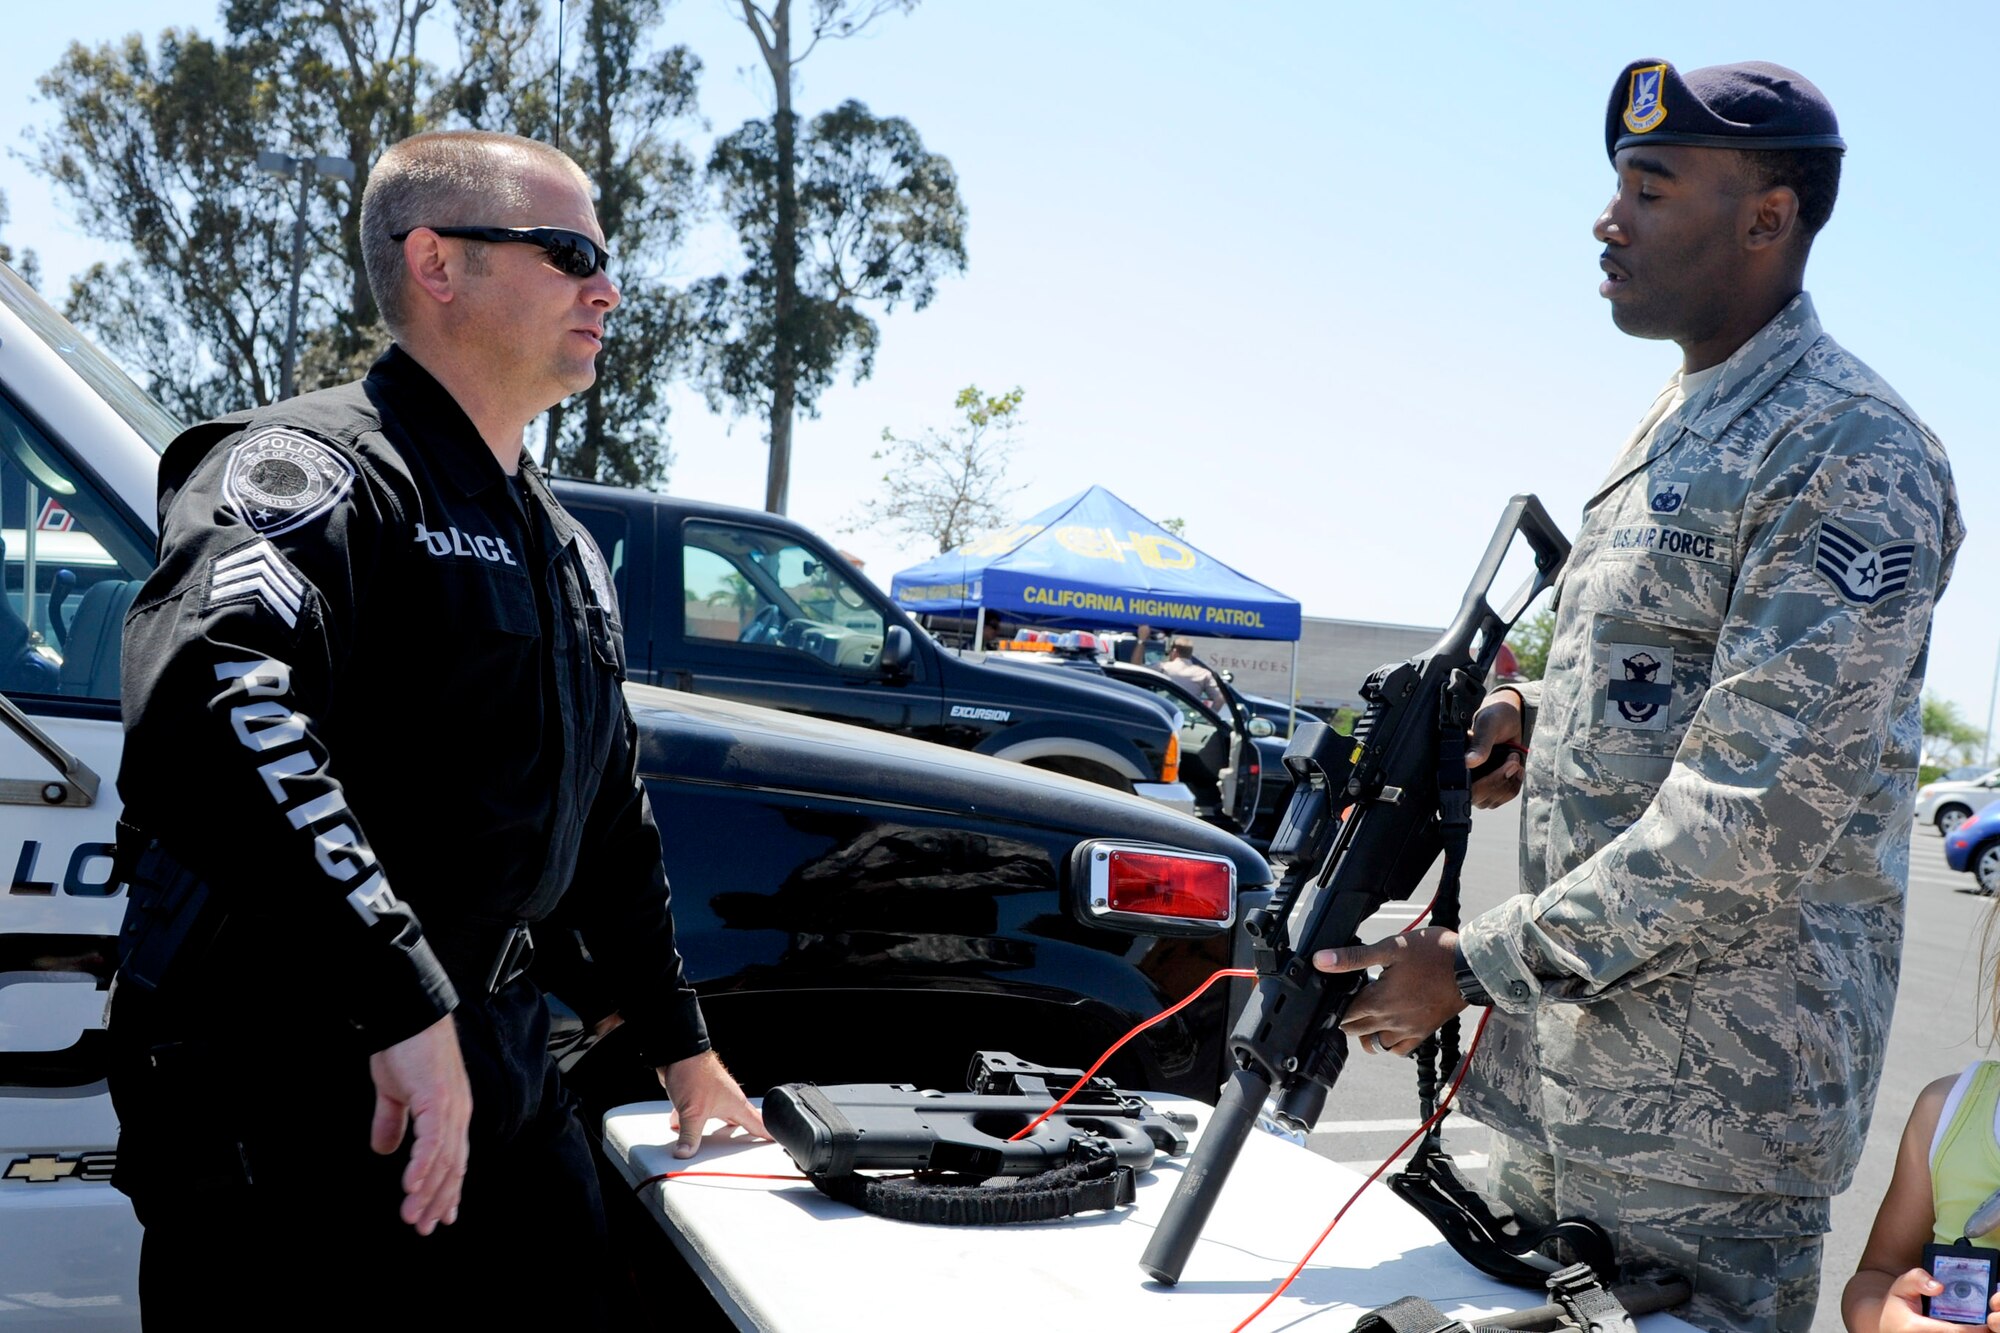 VANDENBERG AIR FORCE BASE, Calif. -- Staff Sgt. Henry Edwards III, a 30th Security Forces Squadron dog handler, talks to a Lompoc Police officer about weapons they use during their daily duties during a police display event at the Albertsons parking lot in Lompoc, Wednesday, May 16th, 2012. The display was held in conjunction with National Police Week, an annual celebration that recognizes the service and sacrifice of U.S. law enforcement personnel. (U.S. Air Force photo/Staff Sgt. Levi Riendeau)